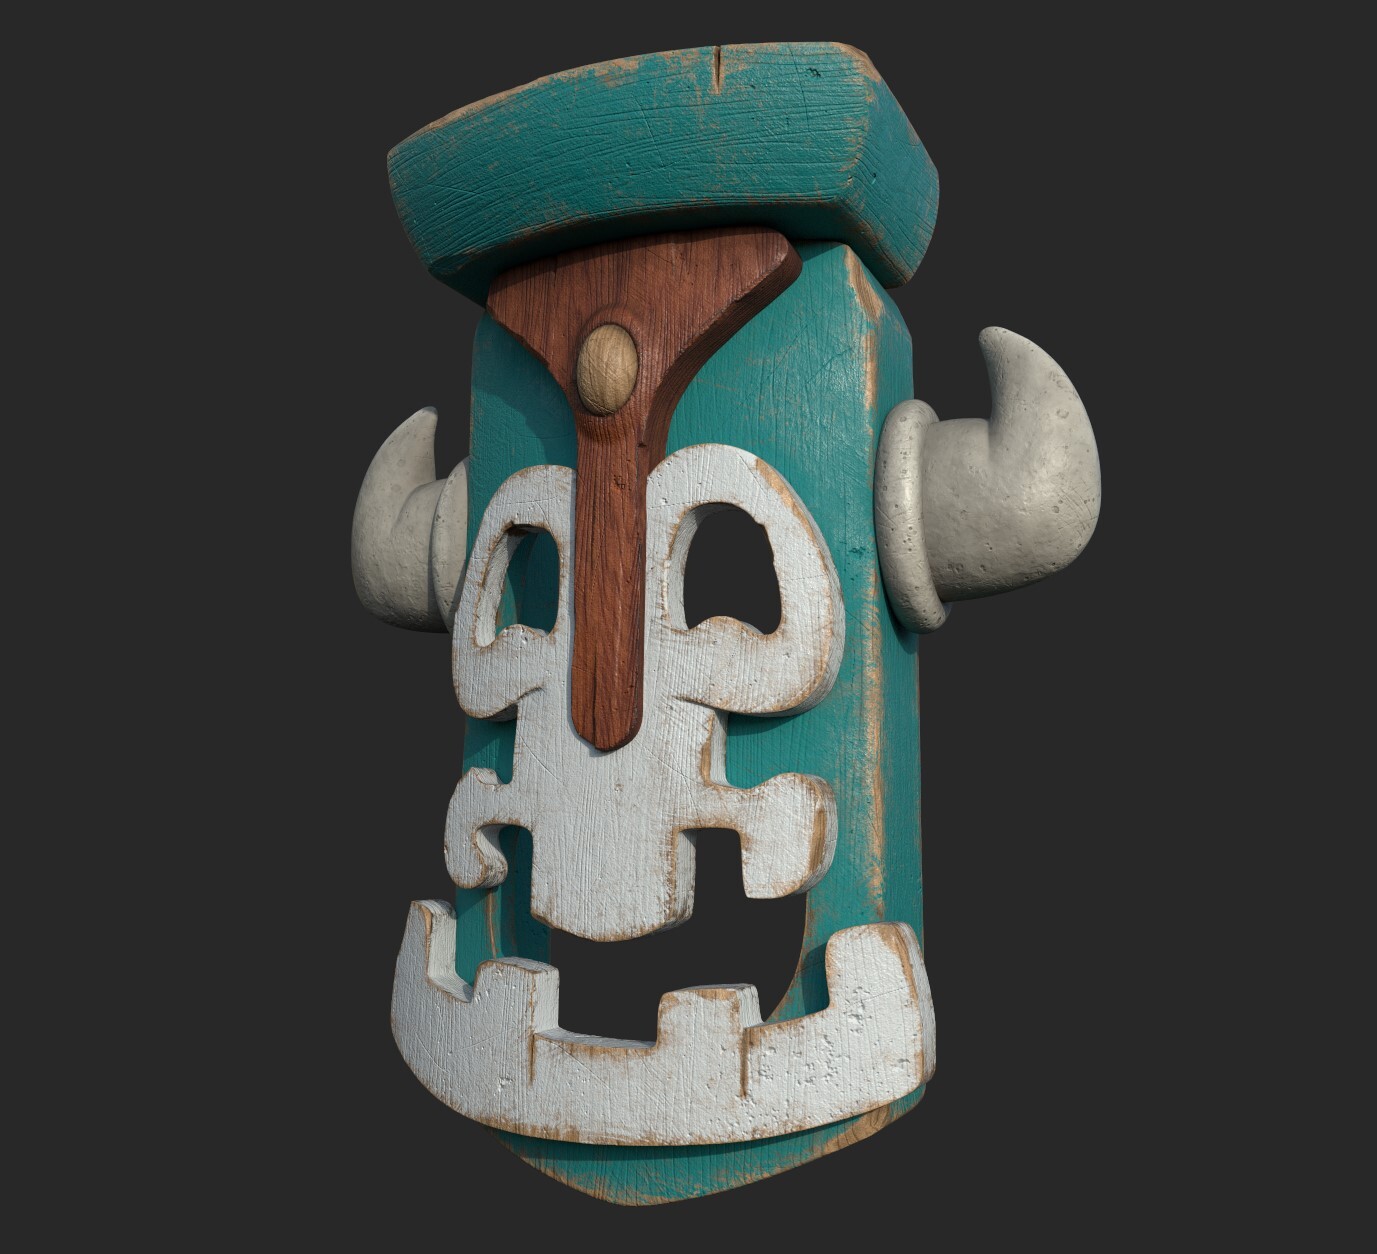 Textured in substance painter